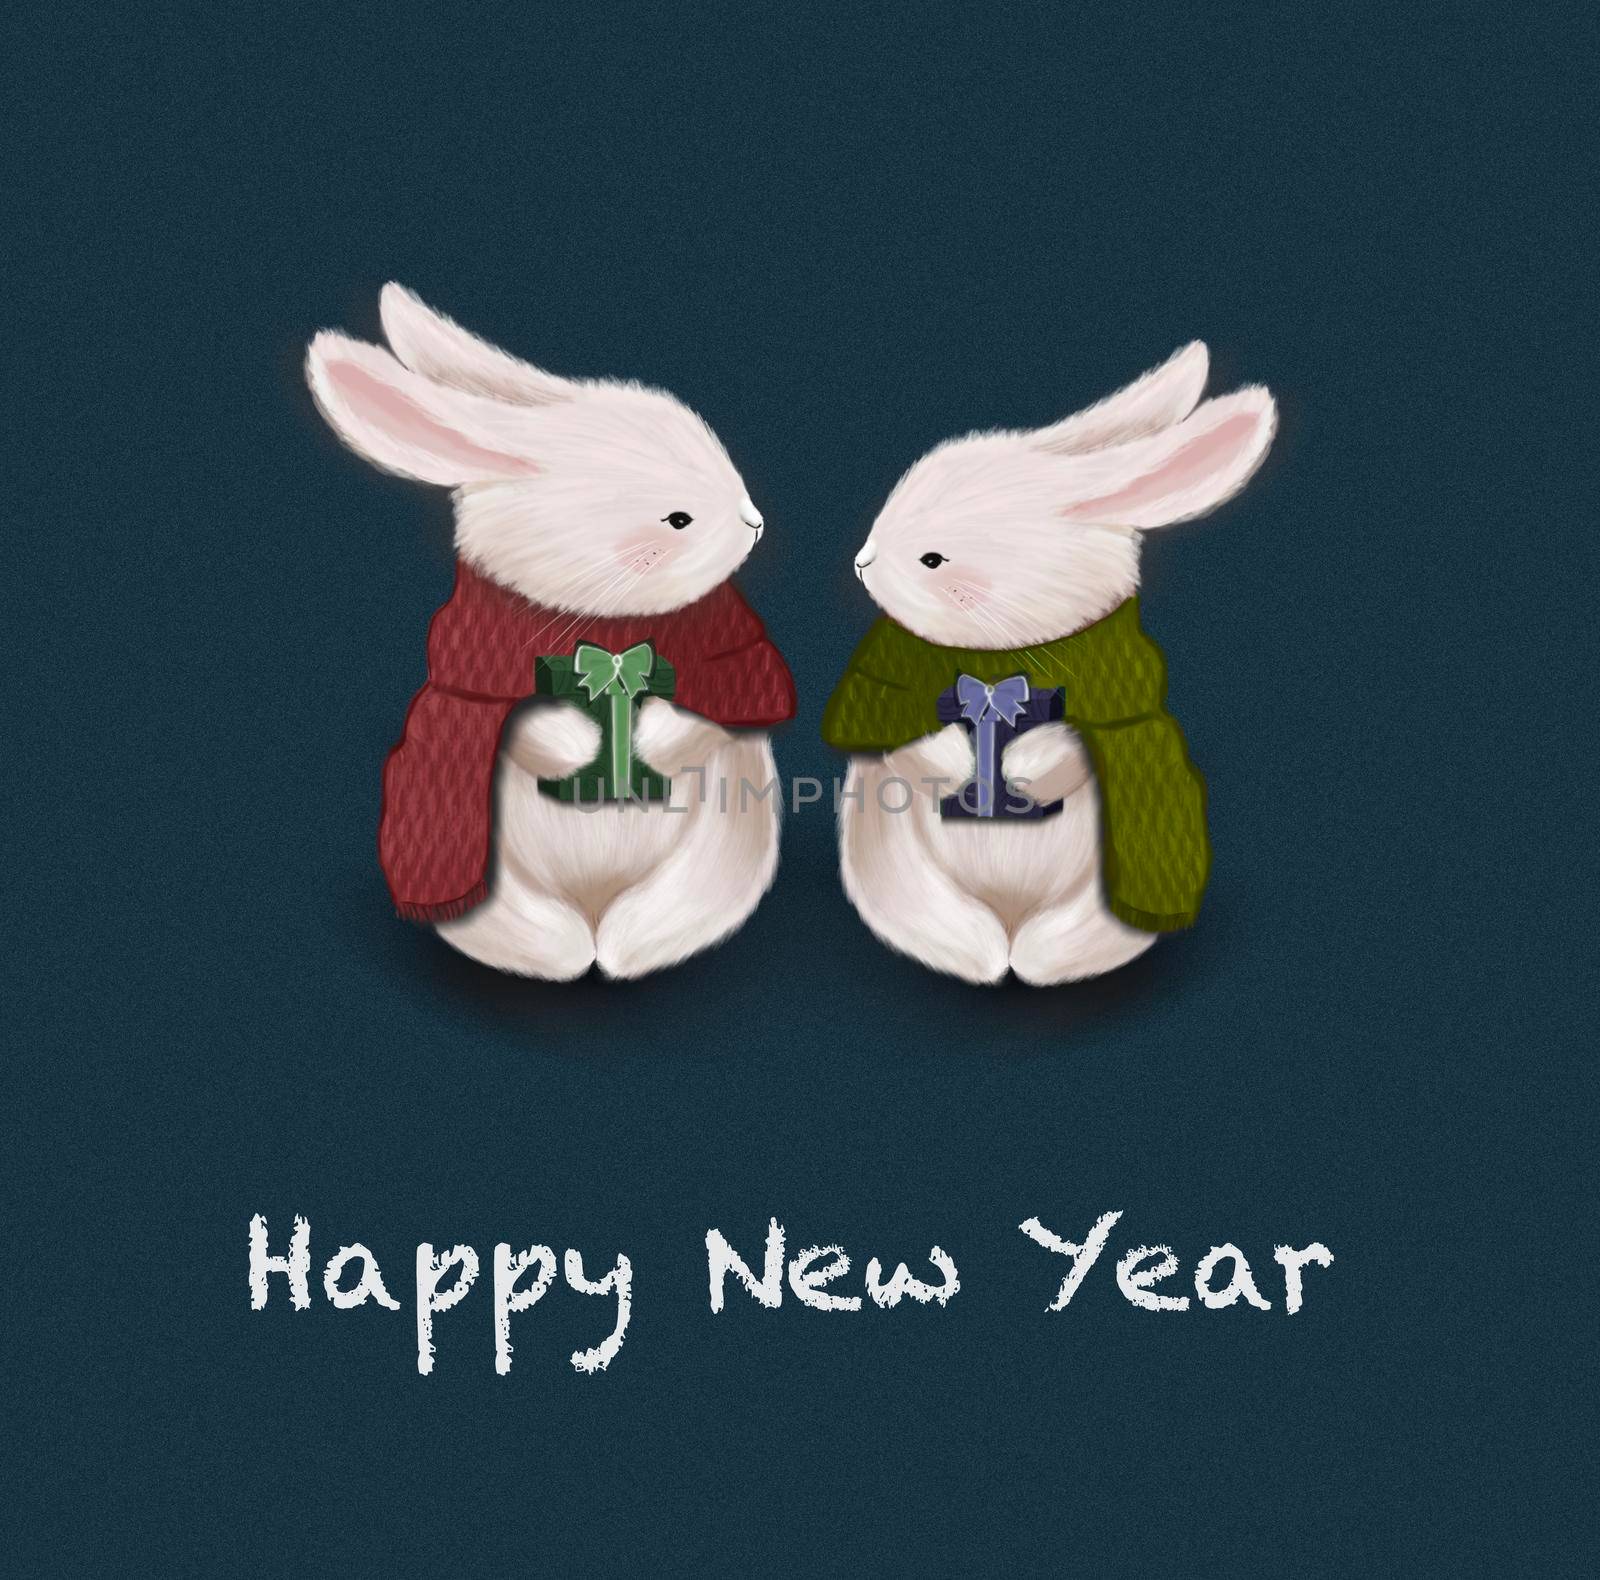 Christmas illustration with cute rabbits. Happy New Year greeting card. by Olga_OLiAN